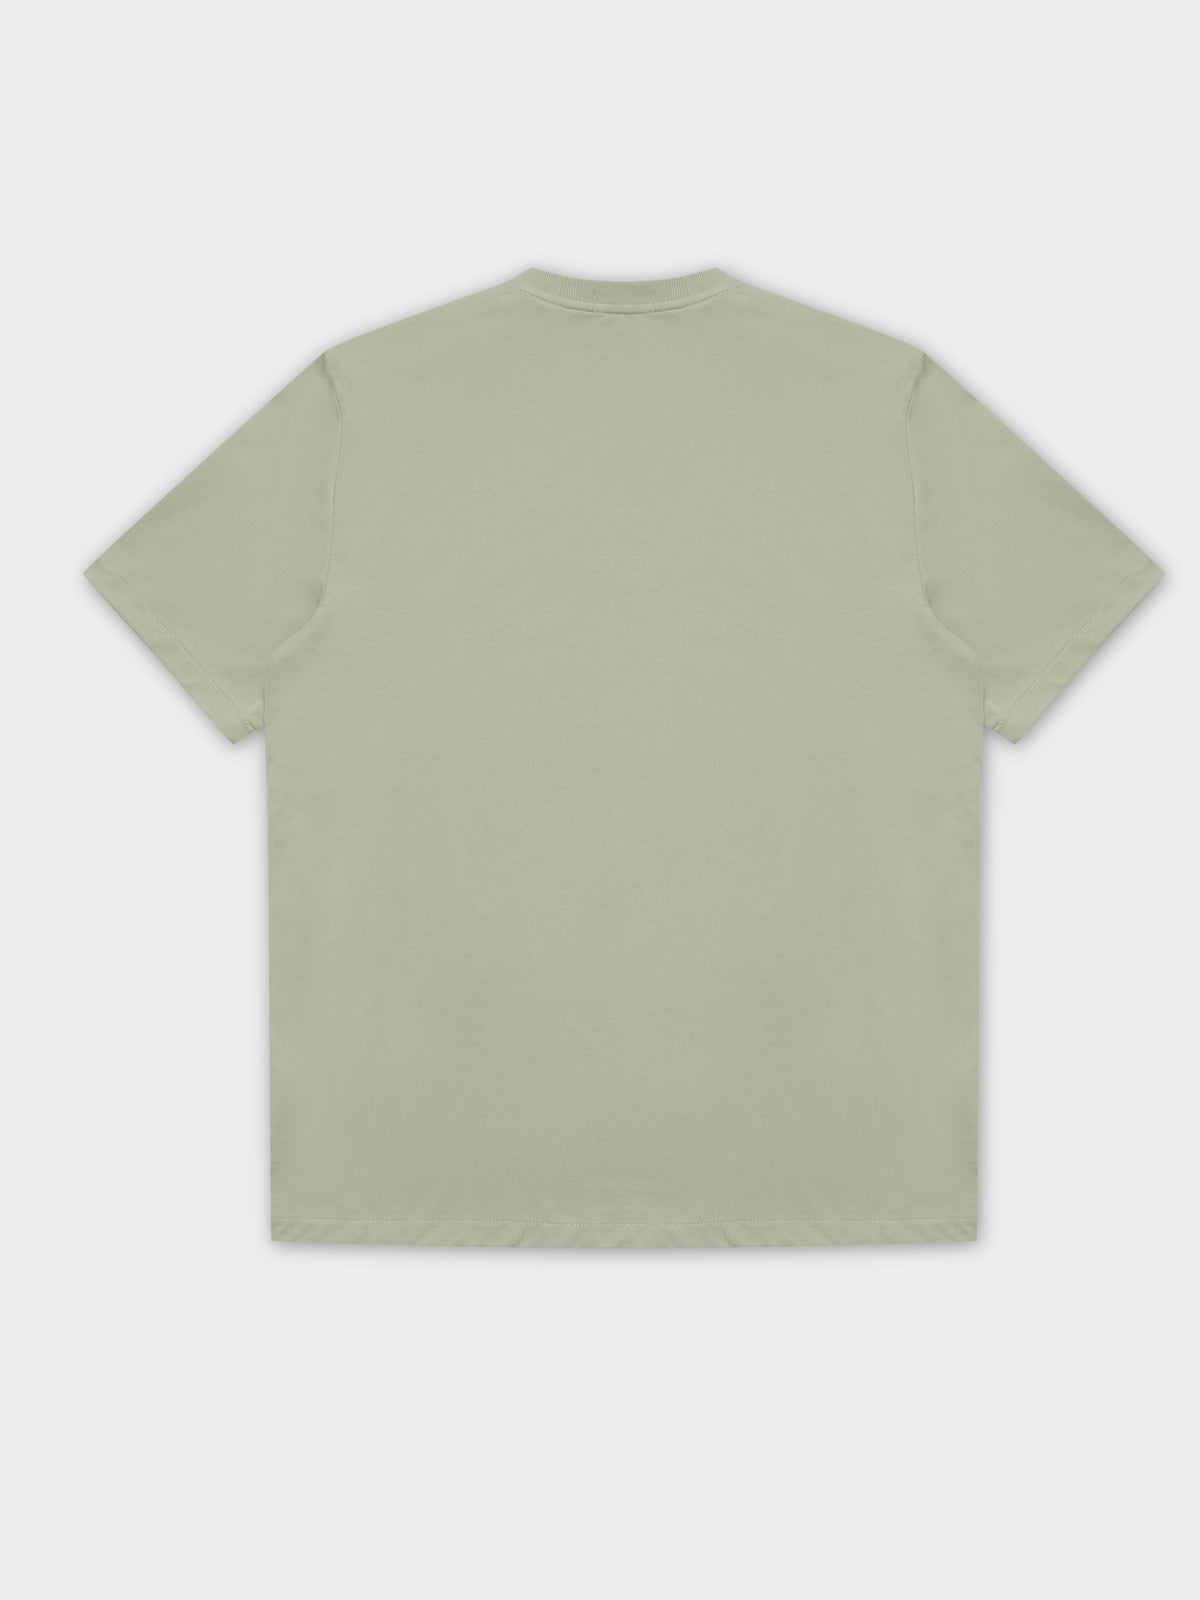 Embroidered T-Shirt in Seagrass